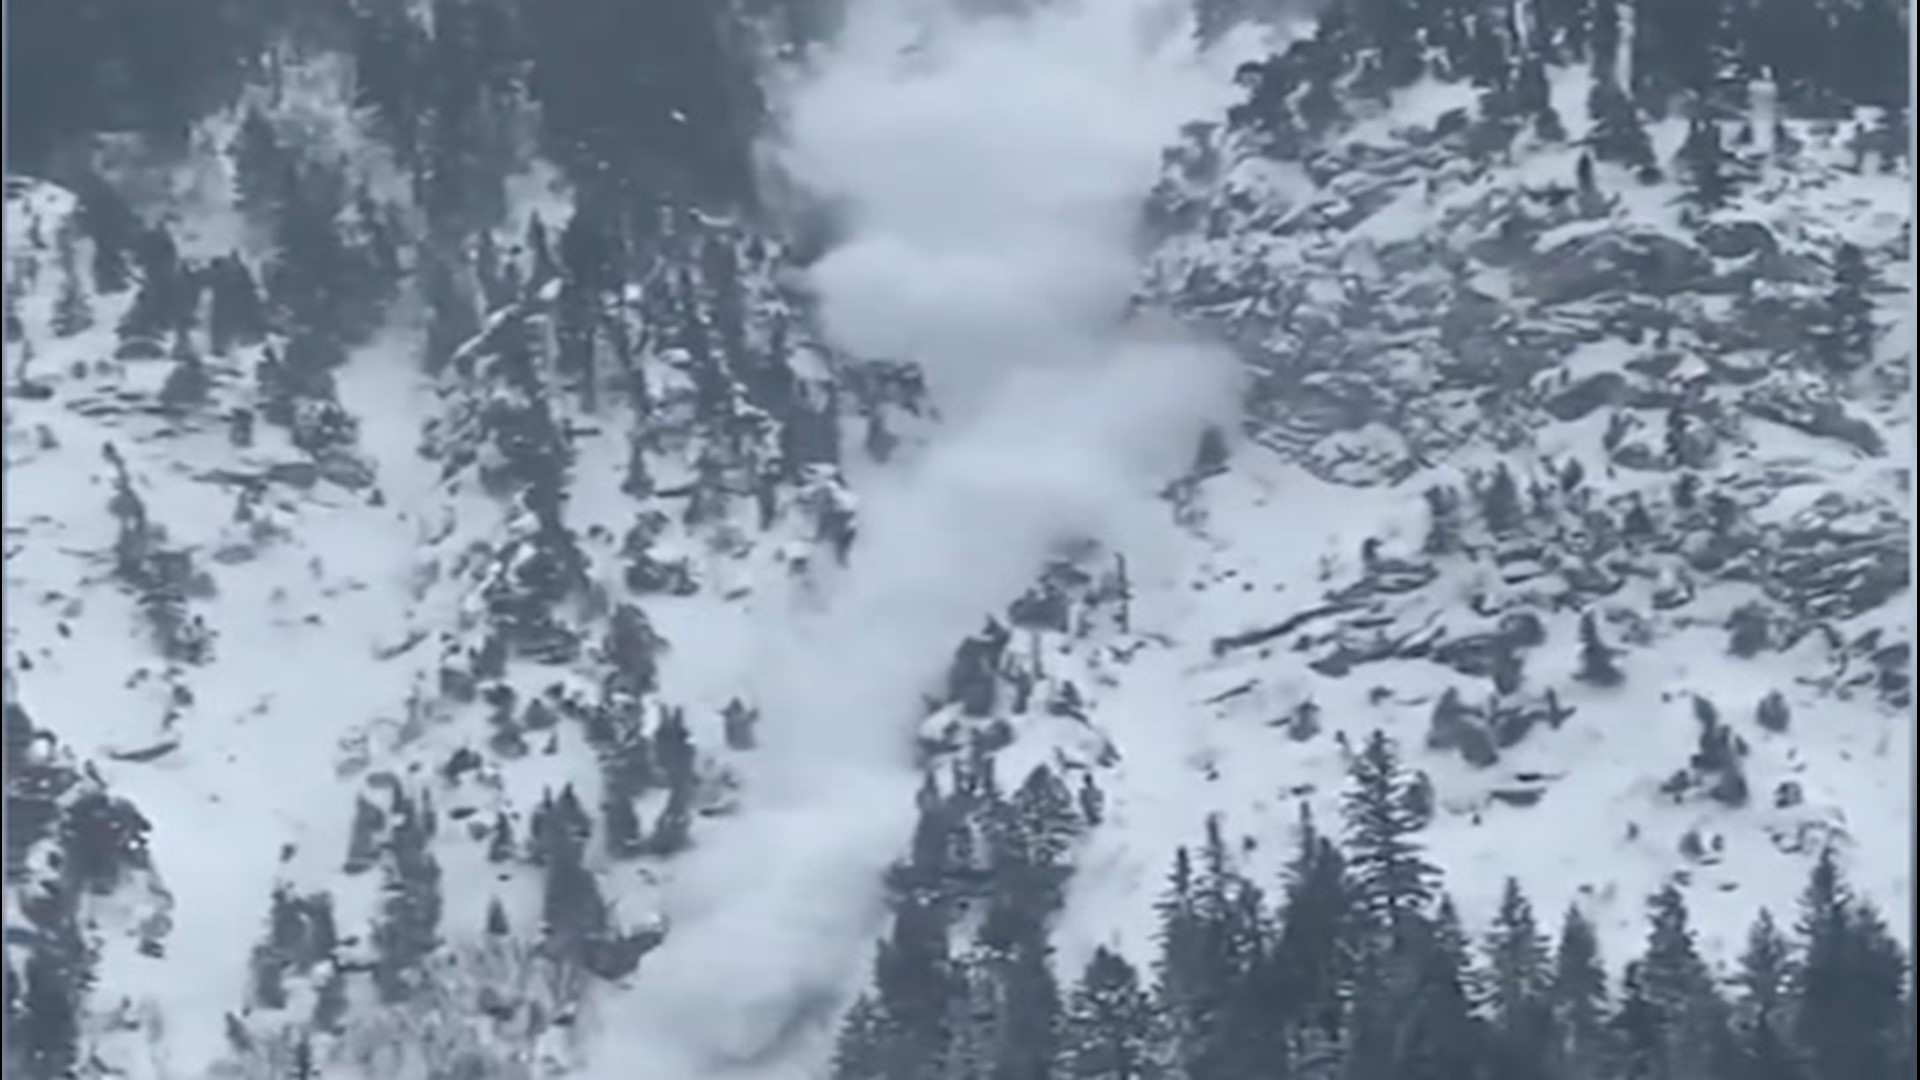 After some major snowfall accumulation, a natural avalanche was triggered in Little Cottonwood Canyon, Utah, on Jan. 17.